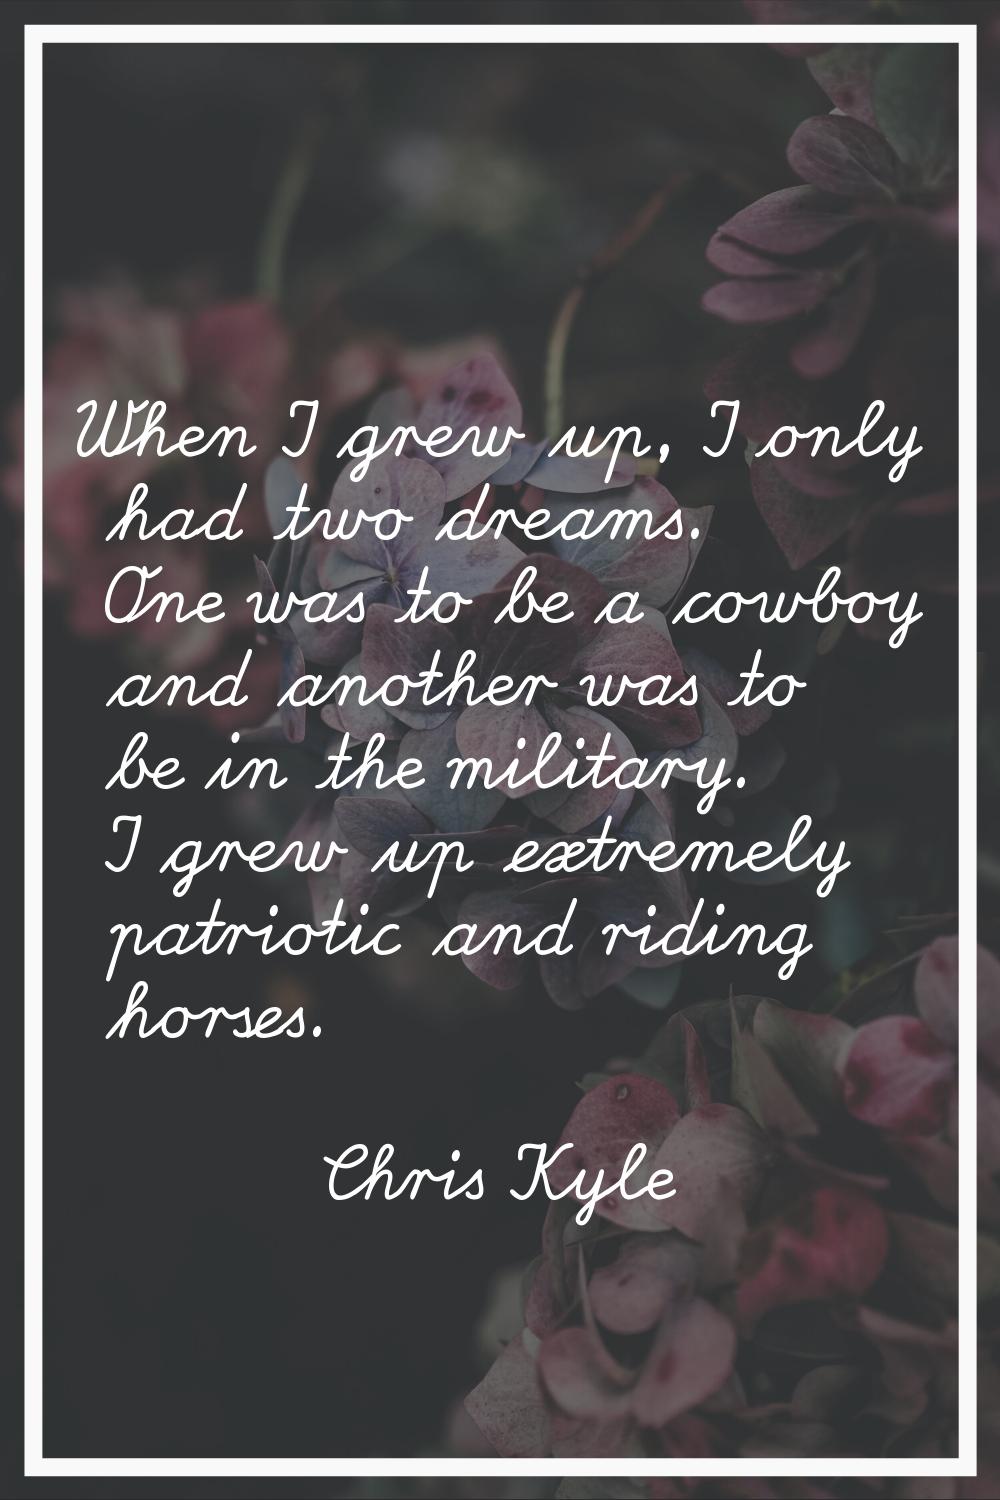 When I grew up, I only had two dreams. One was to be a cowboy and another was to be in the military